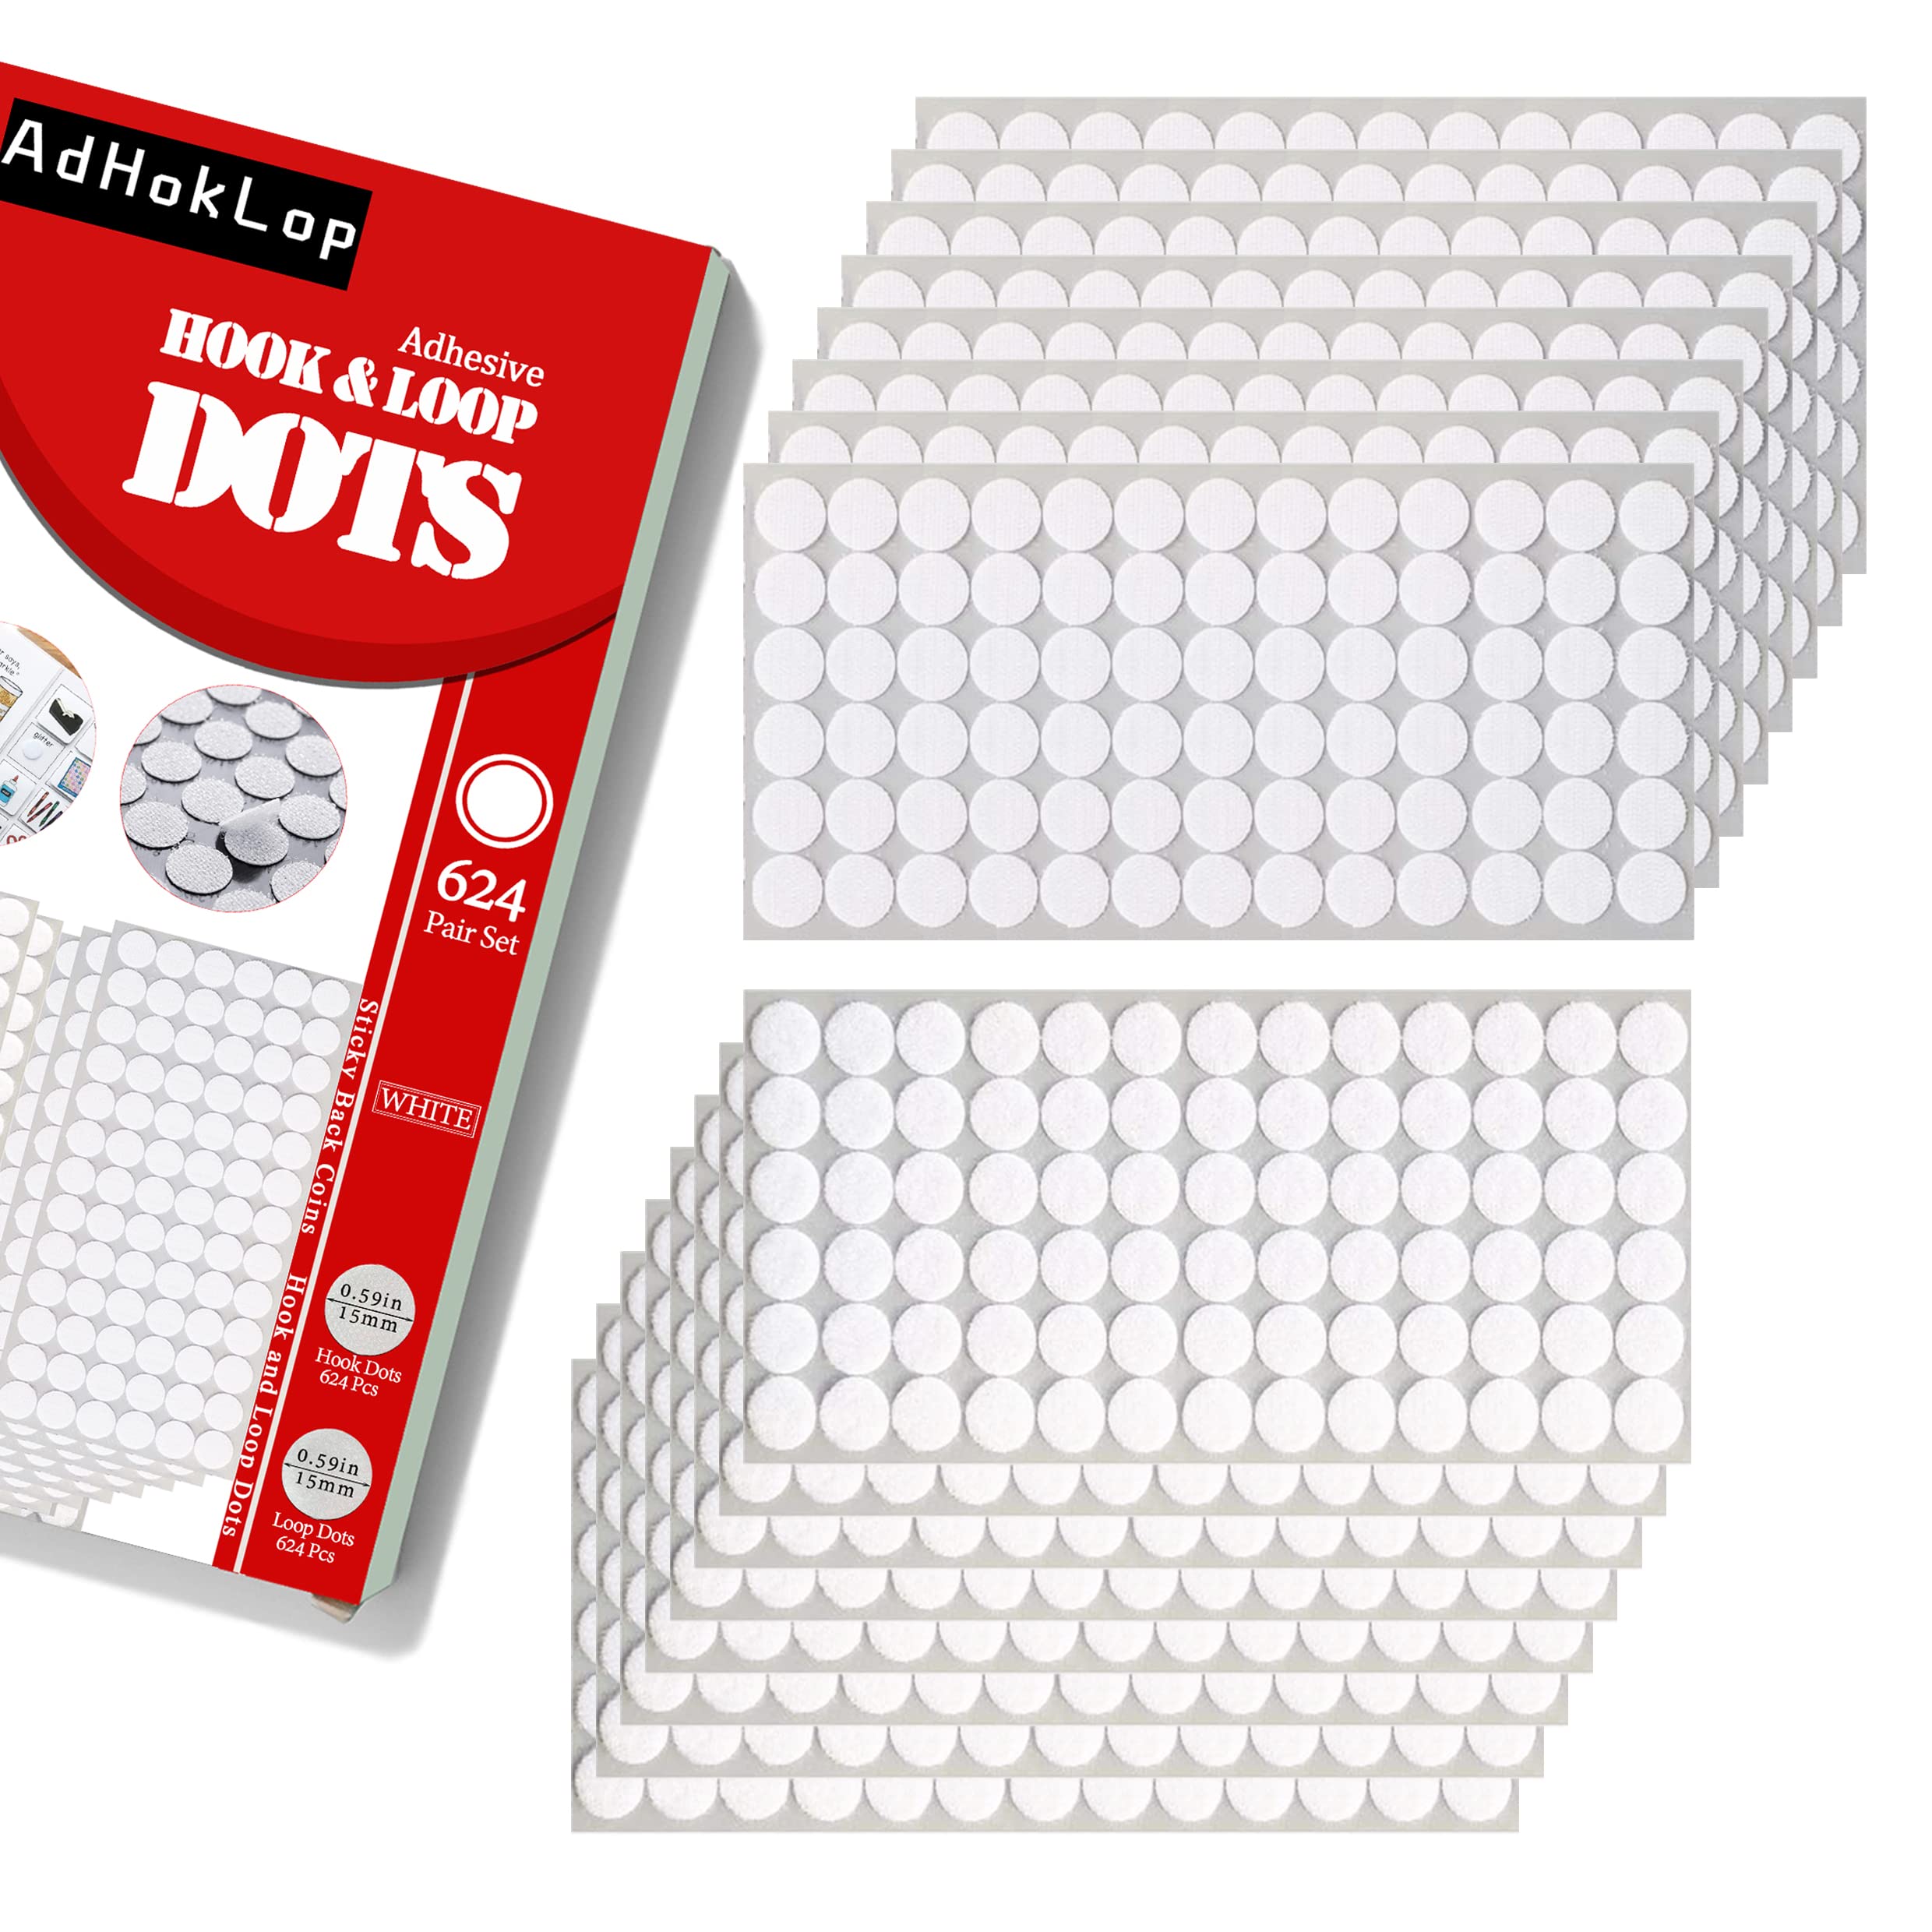  Self Adhesive Dots, 1000Pcs(500 Pair Sets) 0.59 Inch Diameter  Strong Self Adhesive Dots for Classroom Nylon Sticky Back Coins Hook Loop  Strips, Small Circle Dots Stickers Tapes, White : Arts, Crafts